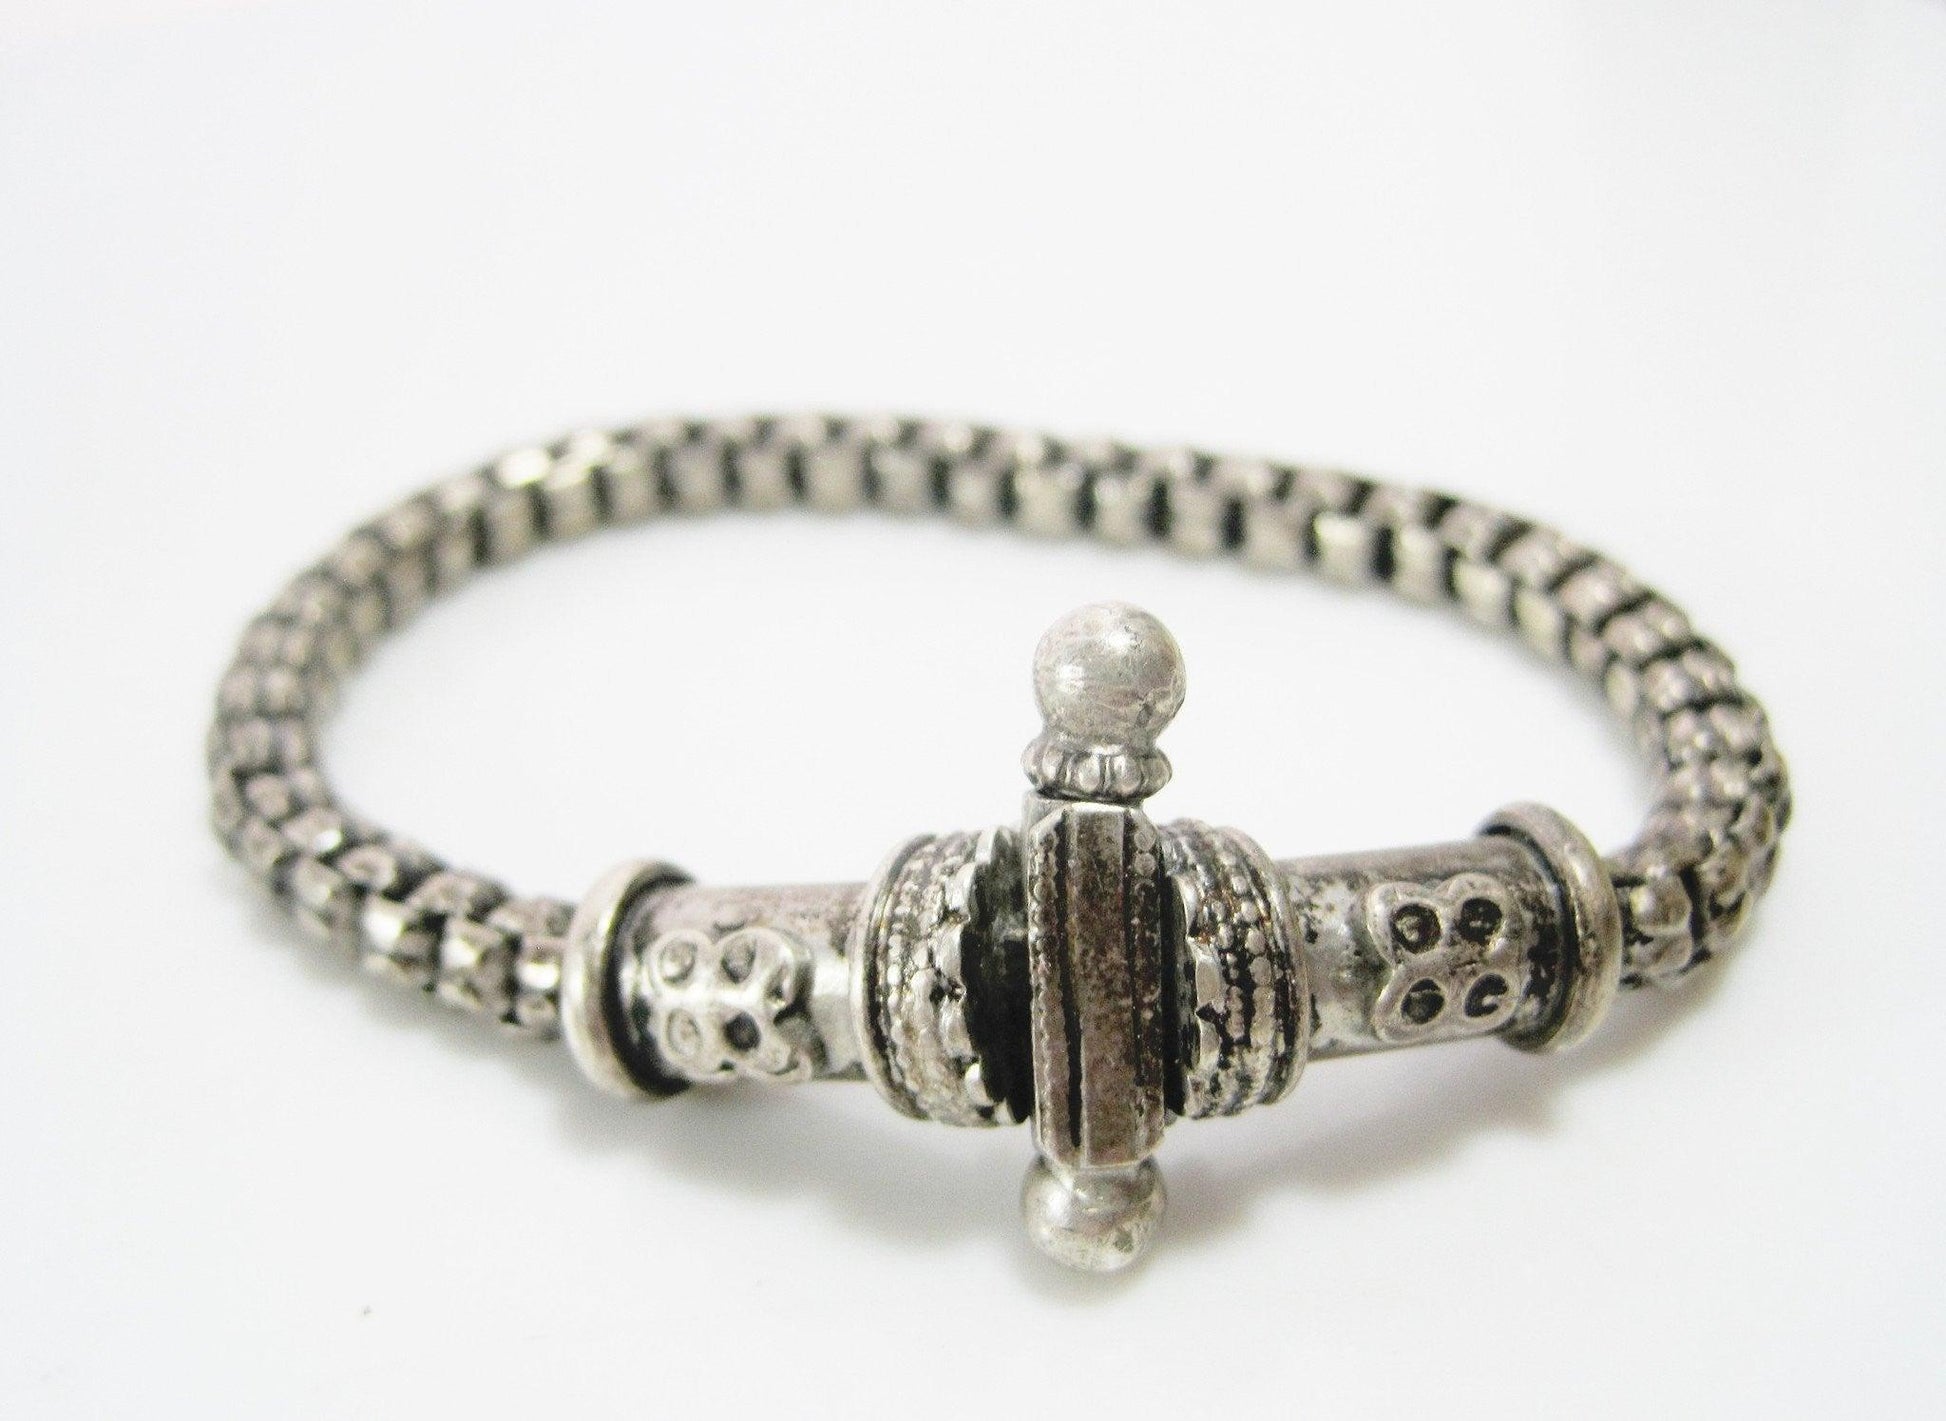 Vintage Silver Indian  Box Chain Bracelet from Rajasthan - Anteeka